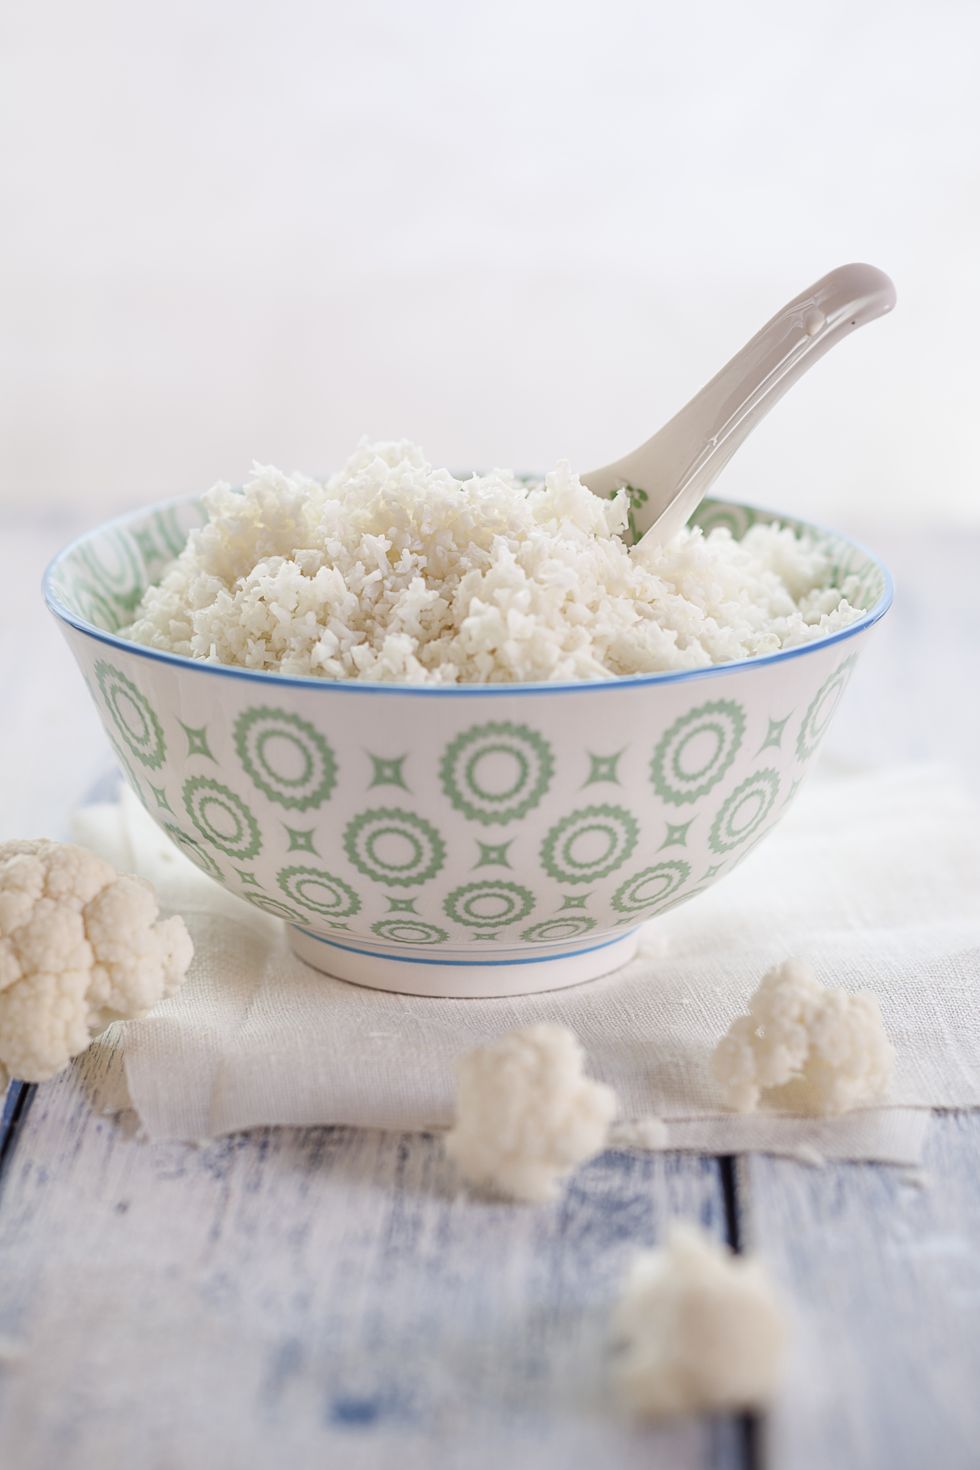 Bowl of cauliflower rice and cauliflower florets on cloth and wood